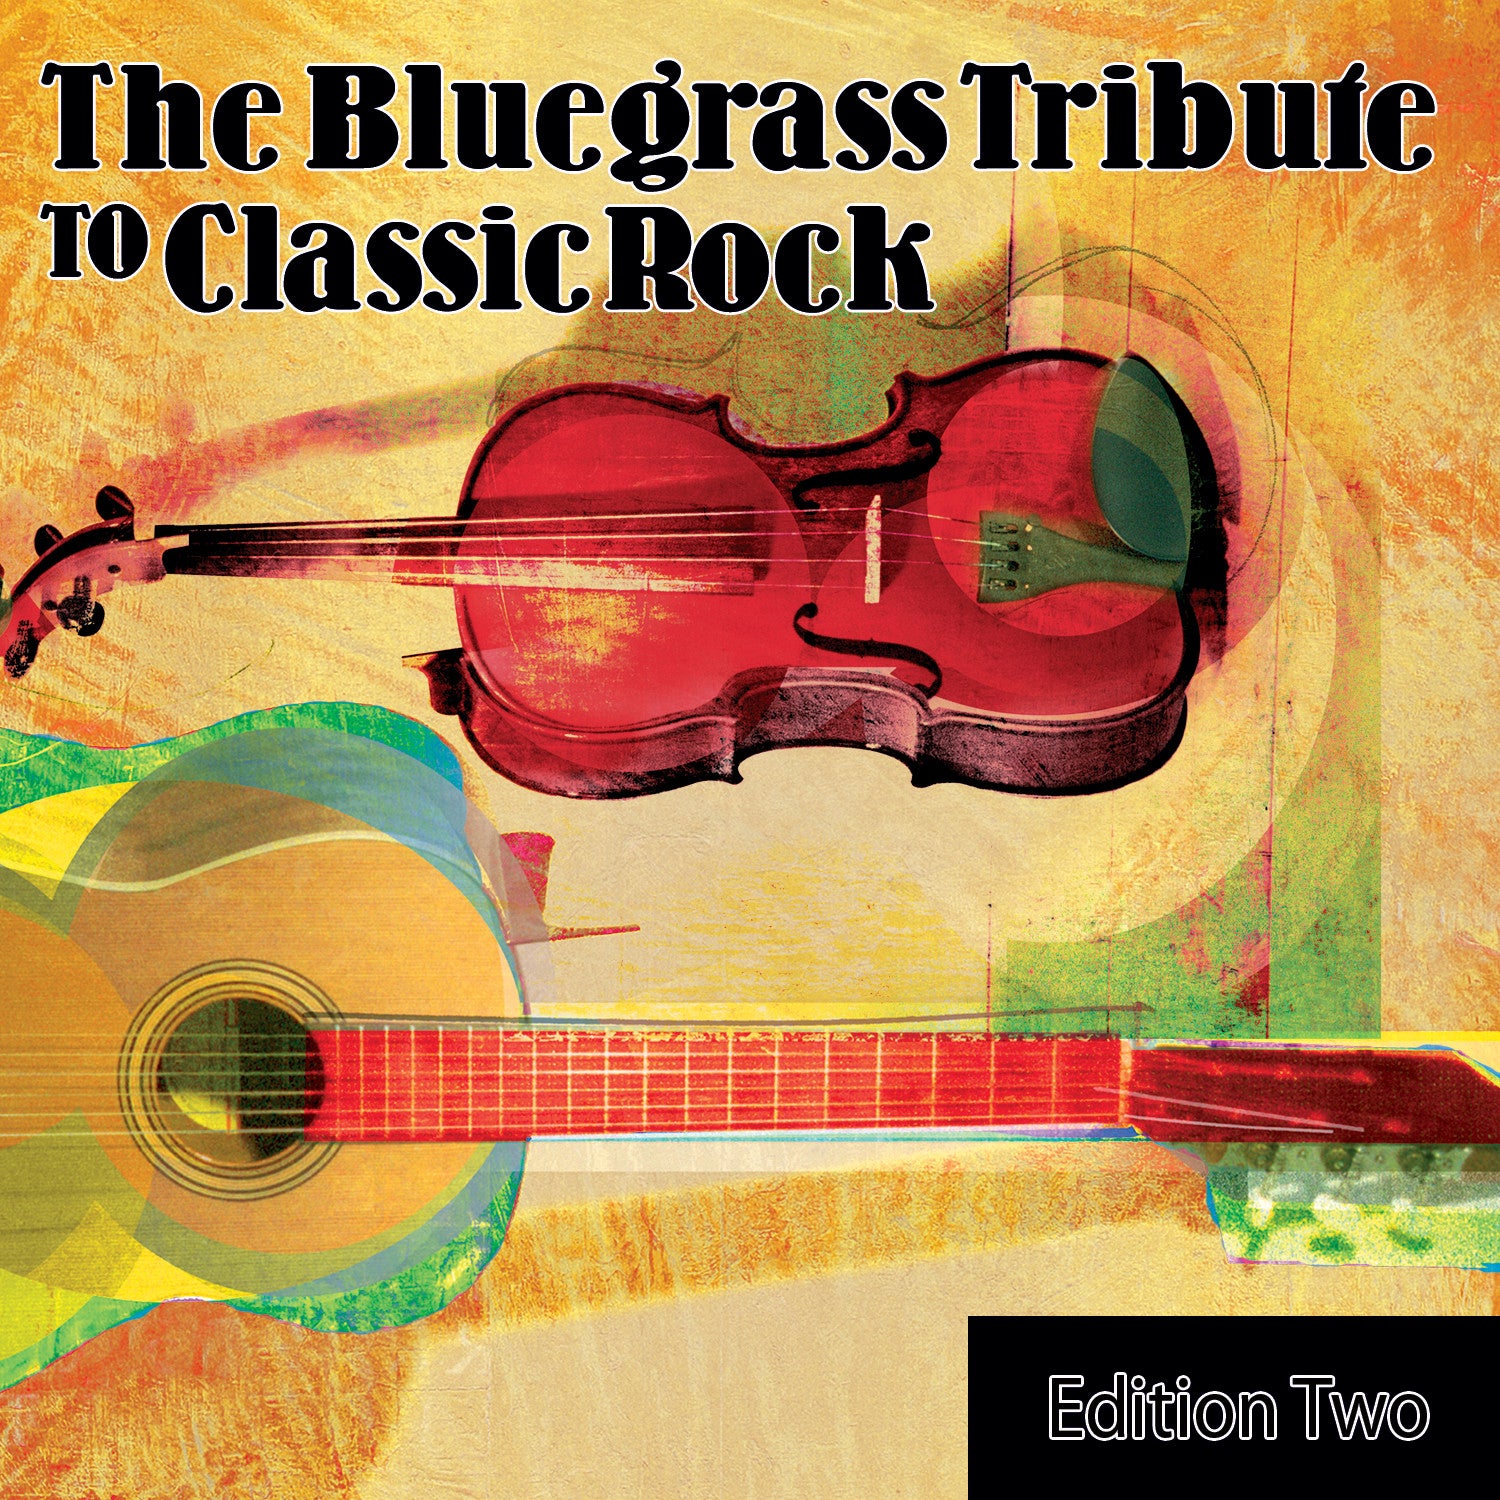 The Bluegrass Tribute to Classic Rock Volume 2